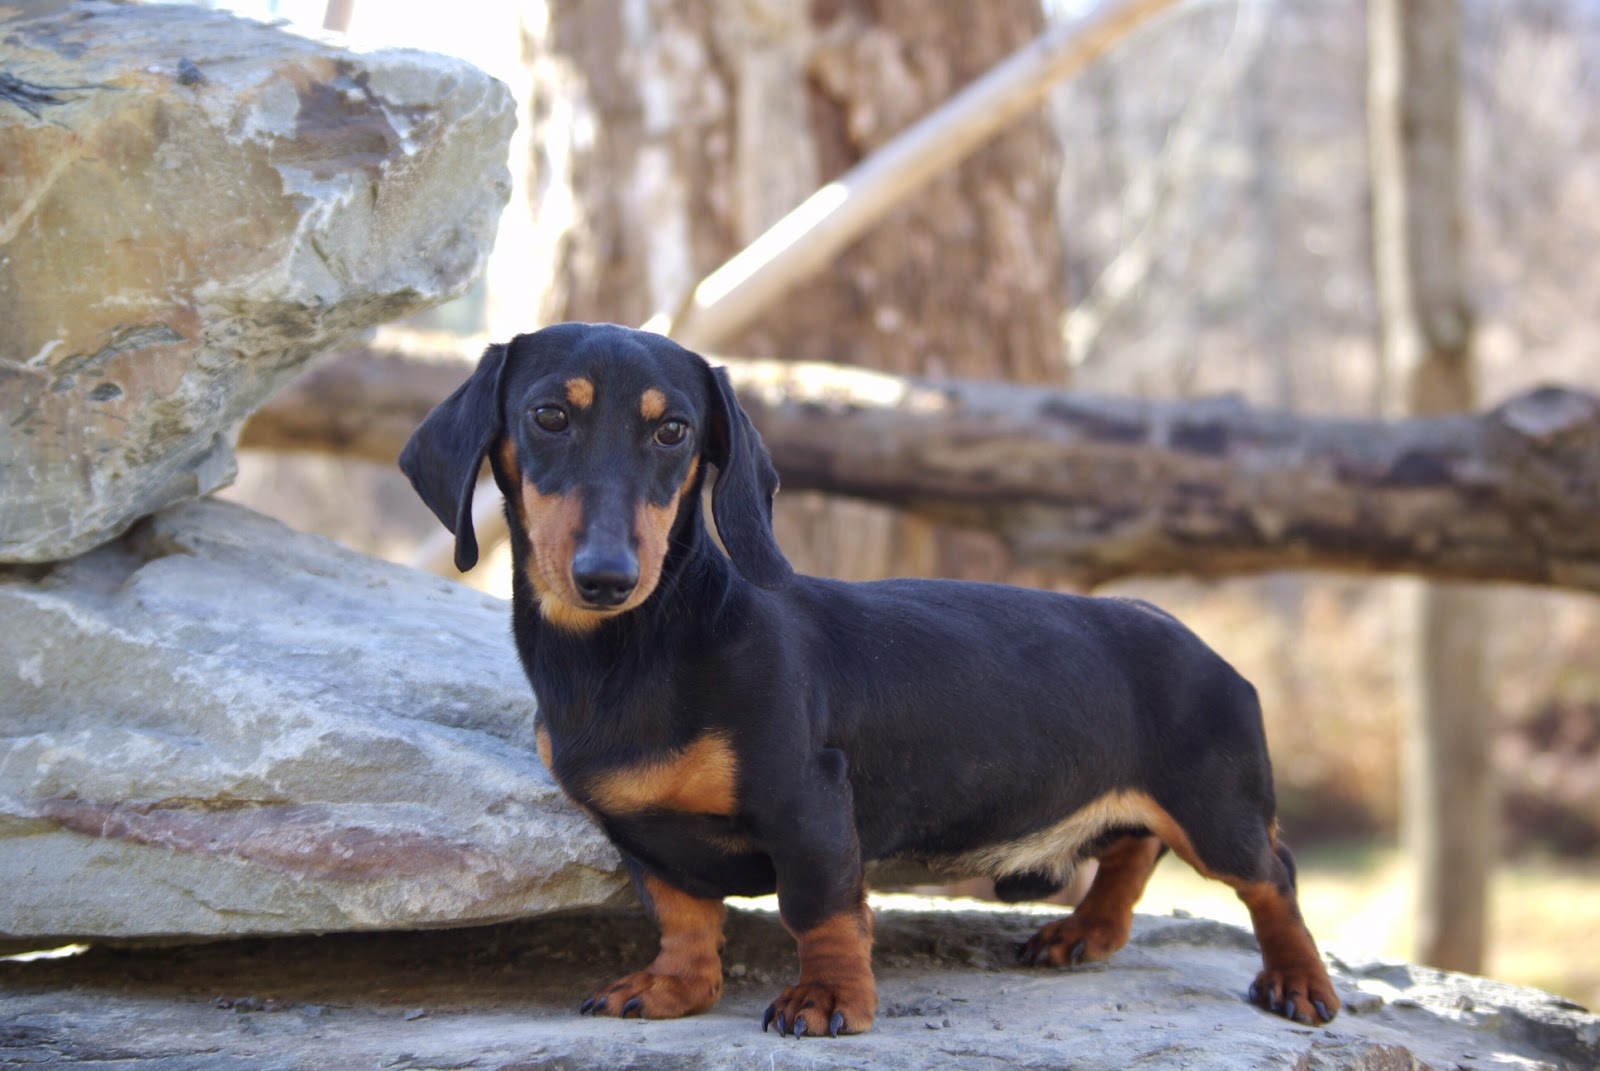 If you want your dog to be just yours Dachshund dog is a perfect breed for....